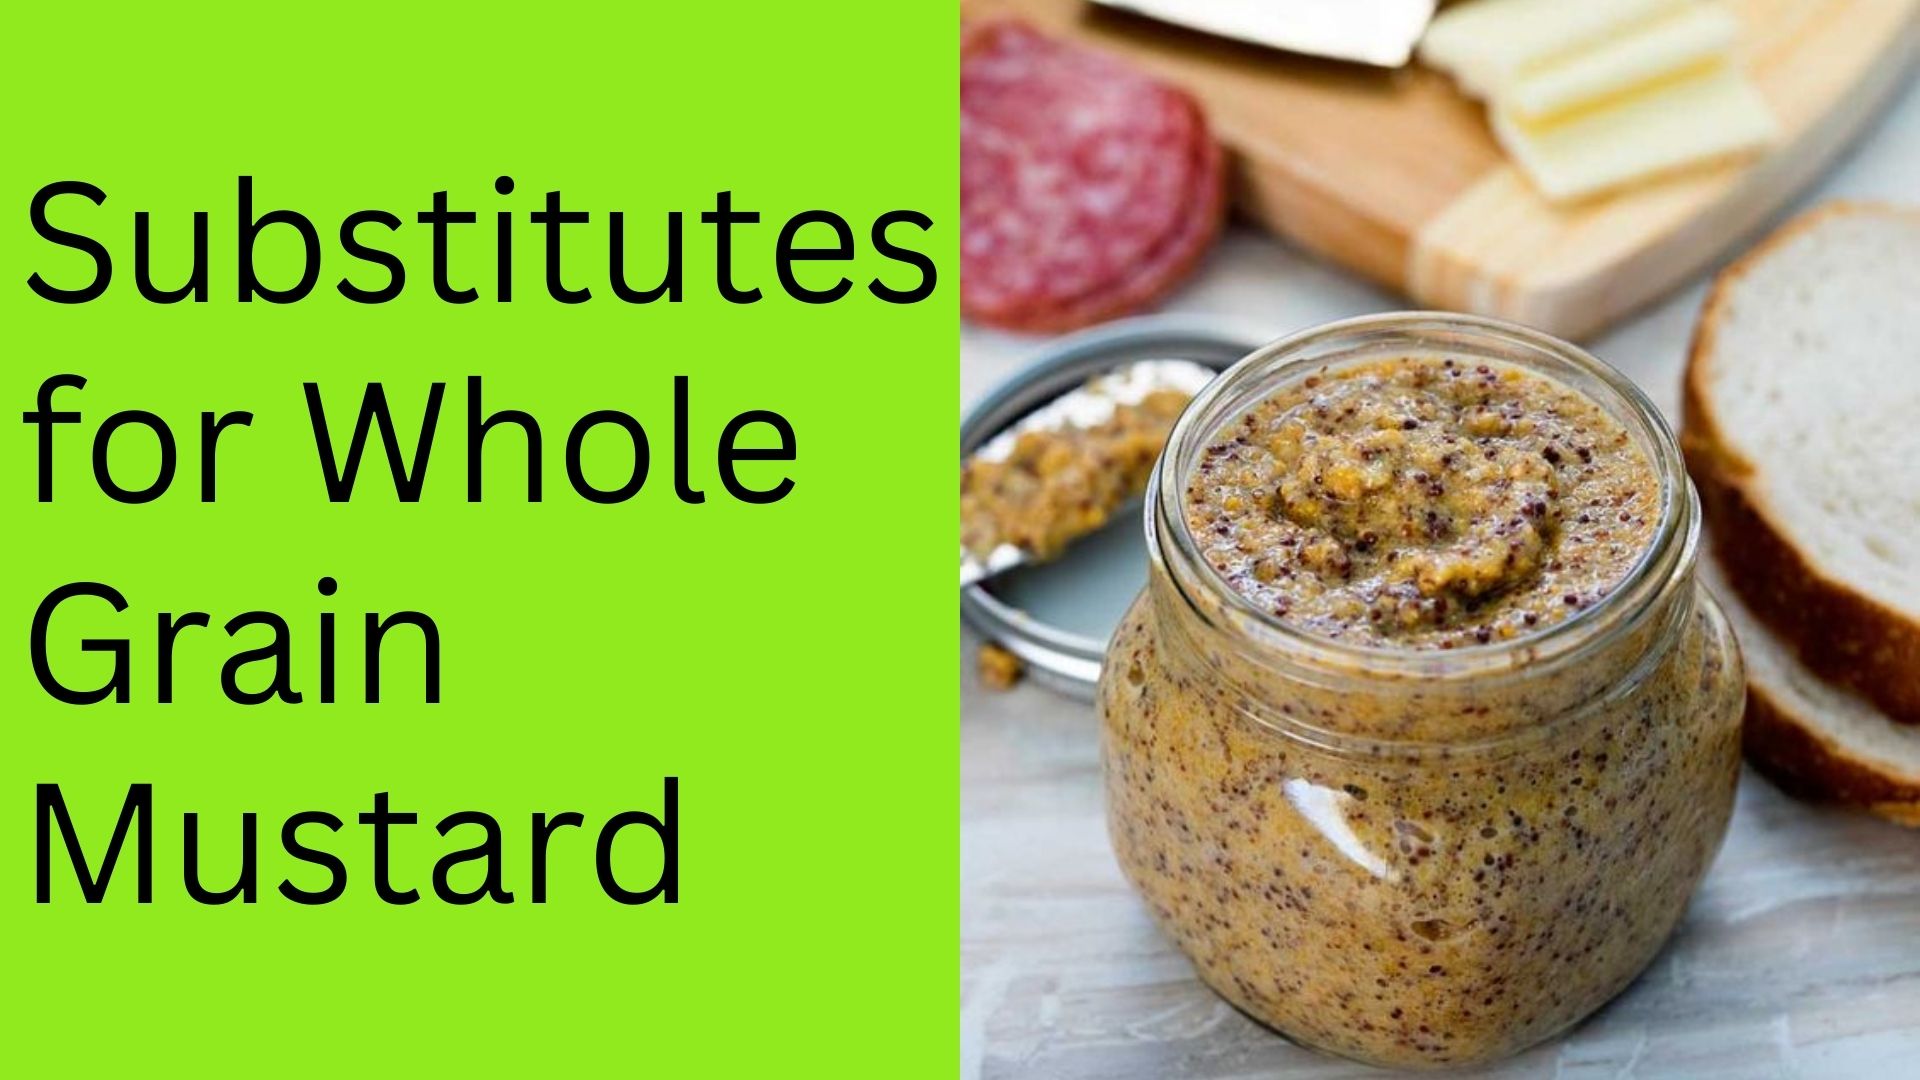 Substitutes for Whole Grain Mustard